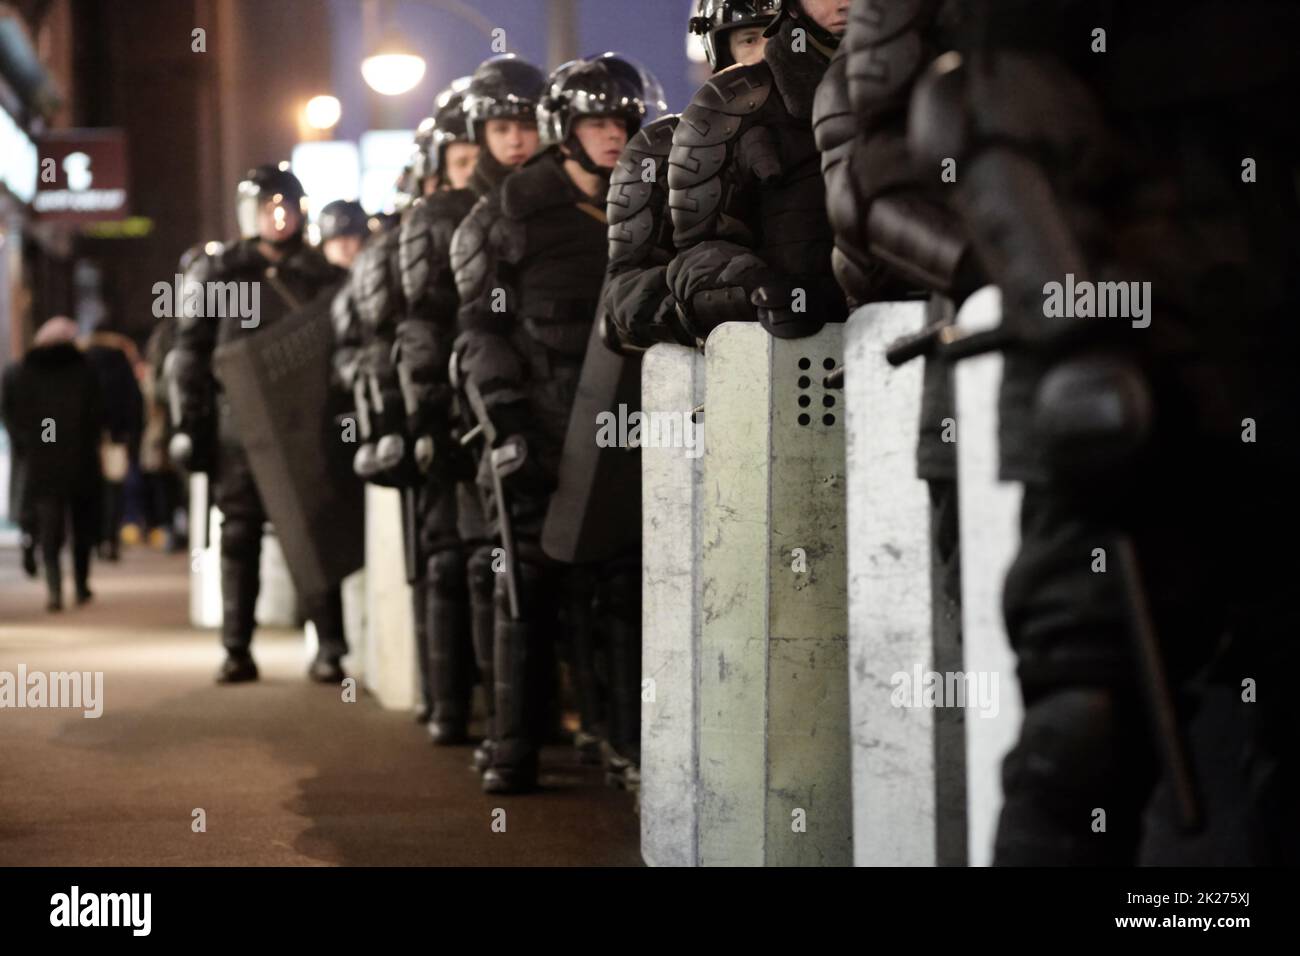 Here to create peace not voilence. The army barricading a riot in the city. Stock Photo